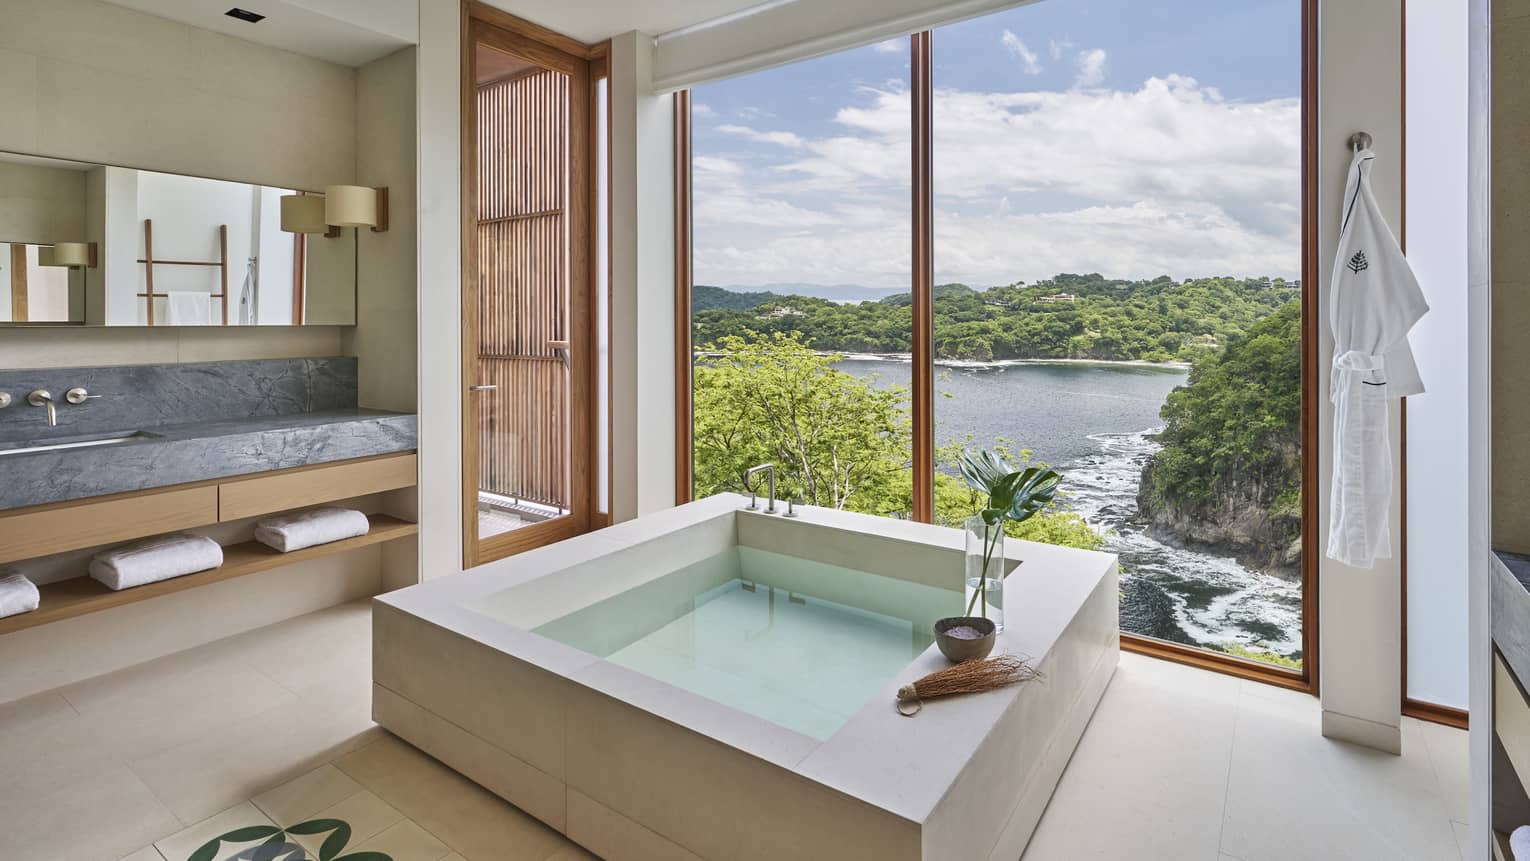 Bathroom with square stone tub; a wall of windows look out to the sea and trees